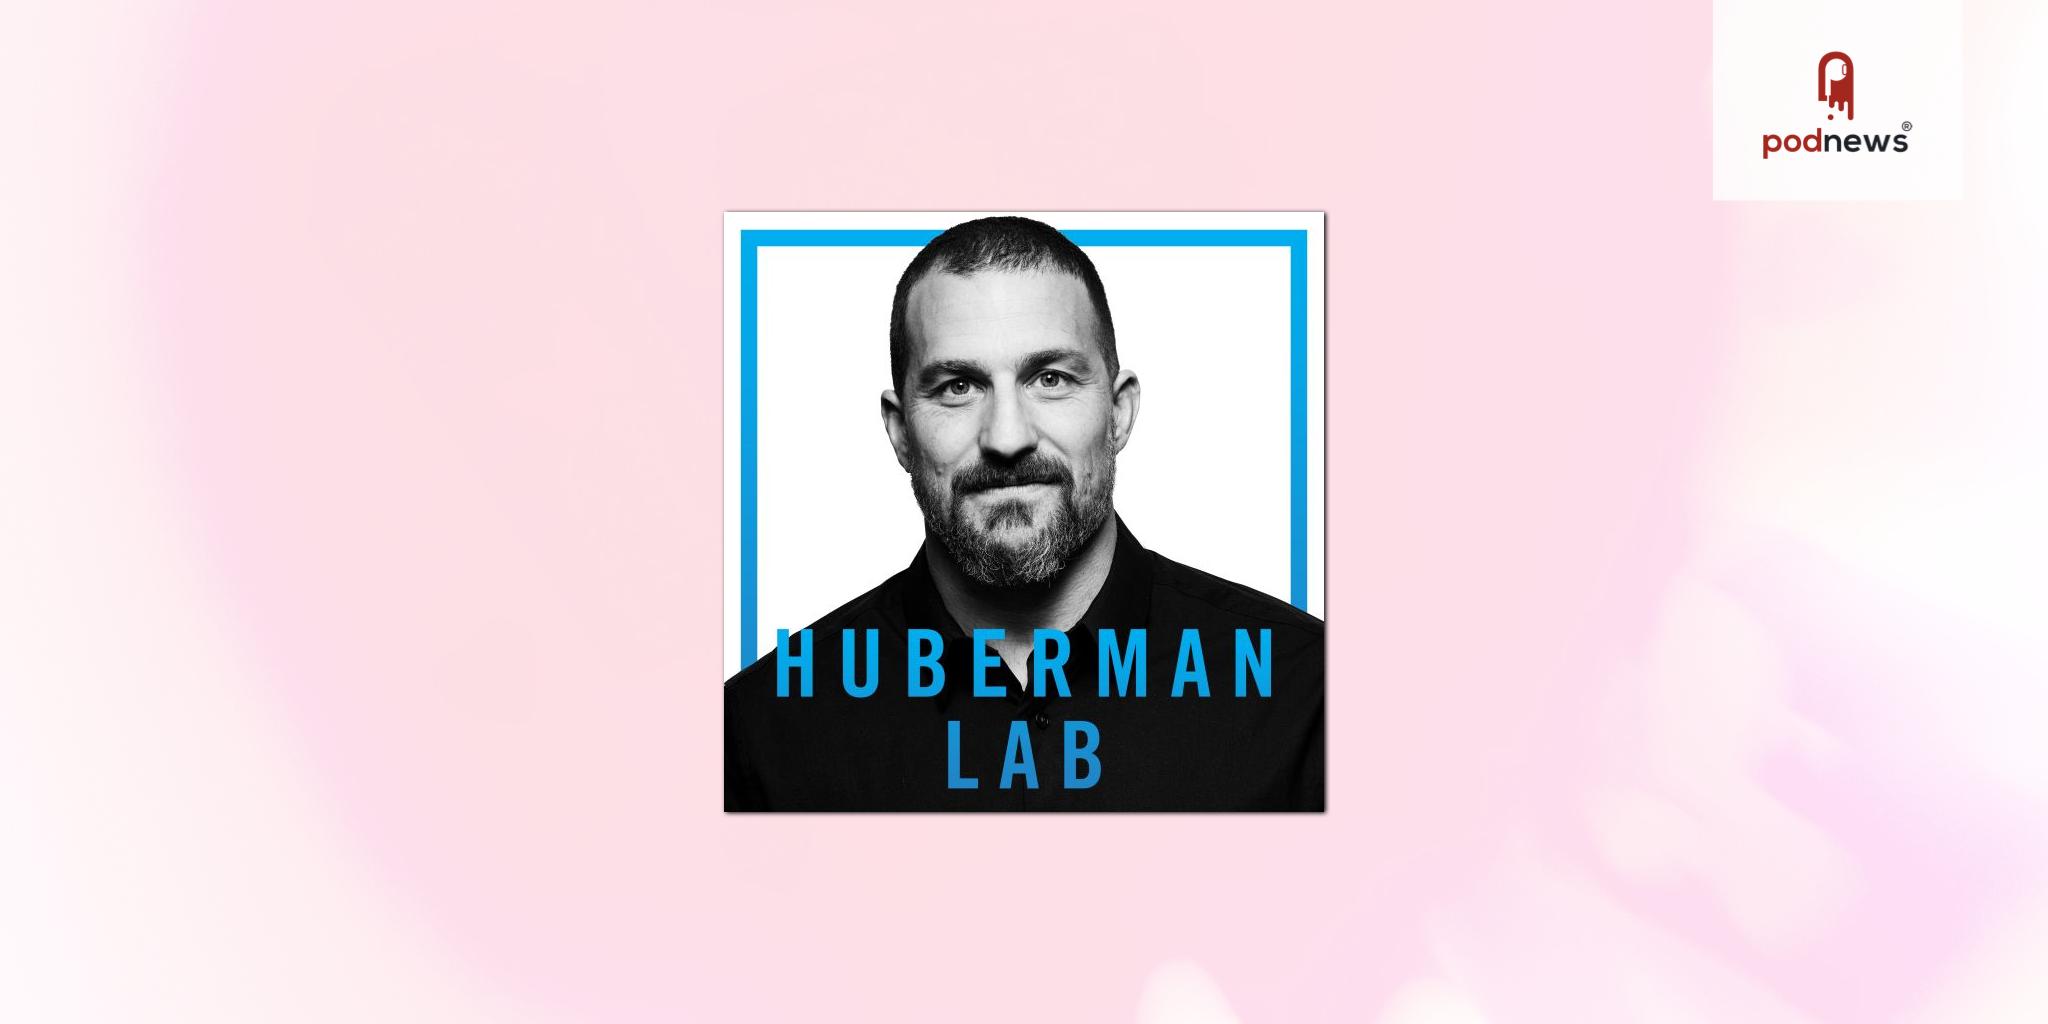 Huberman Lab, the #1 Health & Fitness Podcast, Teams Up with Supercast  to Launch Paid Subscription